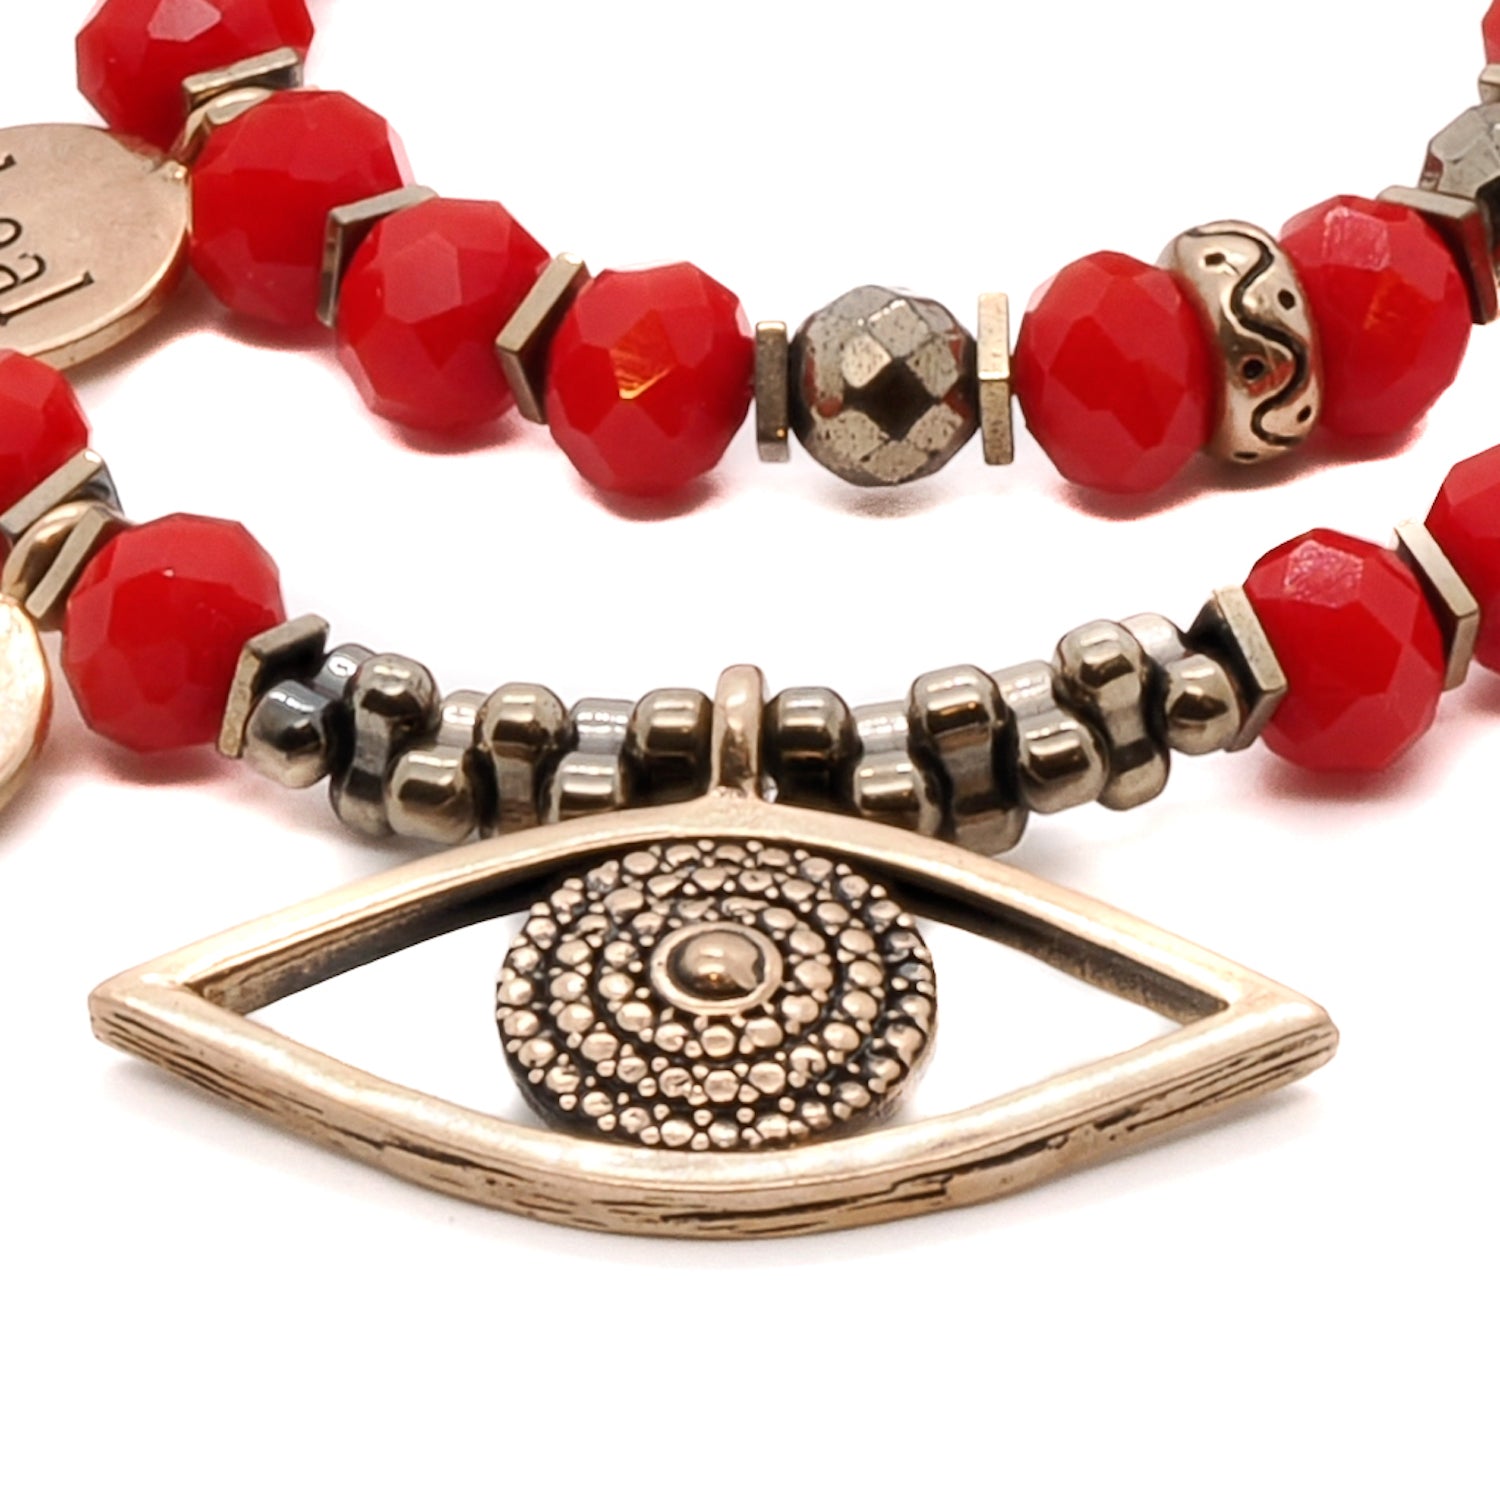 Red Crystal Evil Eye Bracelet: This bracelet combines the protective powers of the Evil Eye symbol with the vibrant energy of red color crystals, making it a meaningful and stylish accessory.